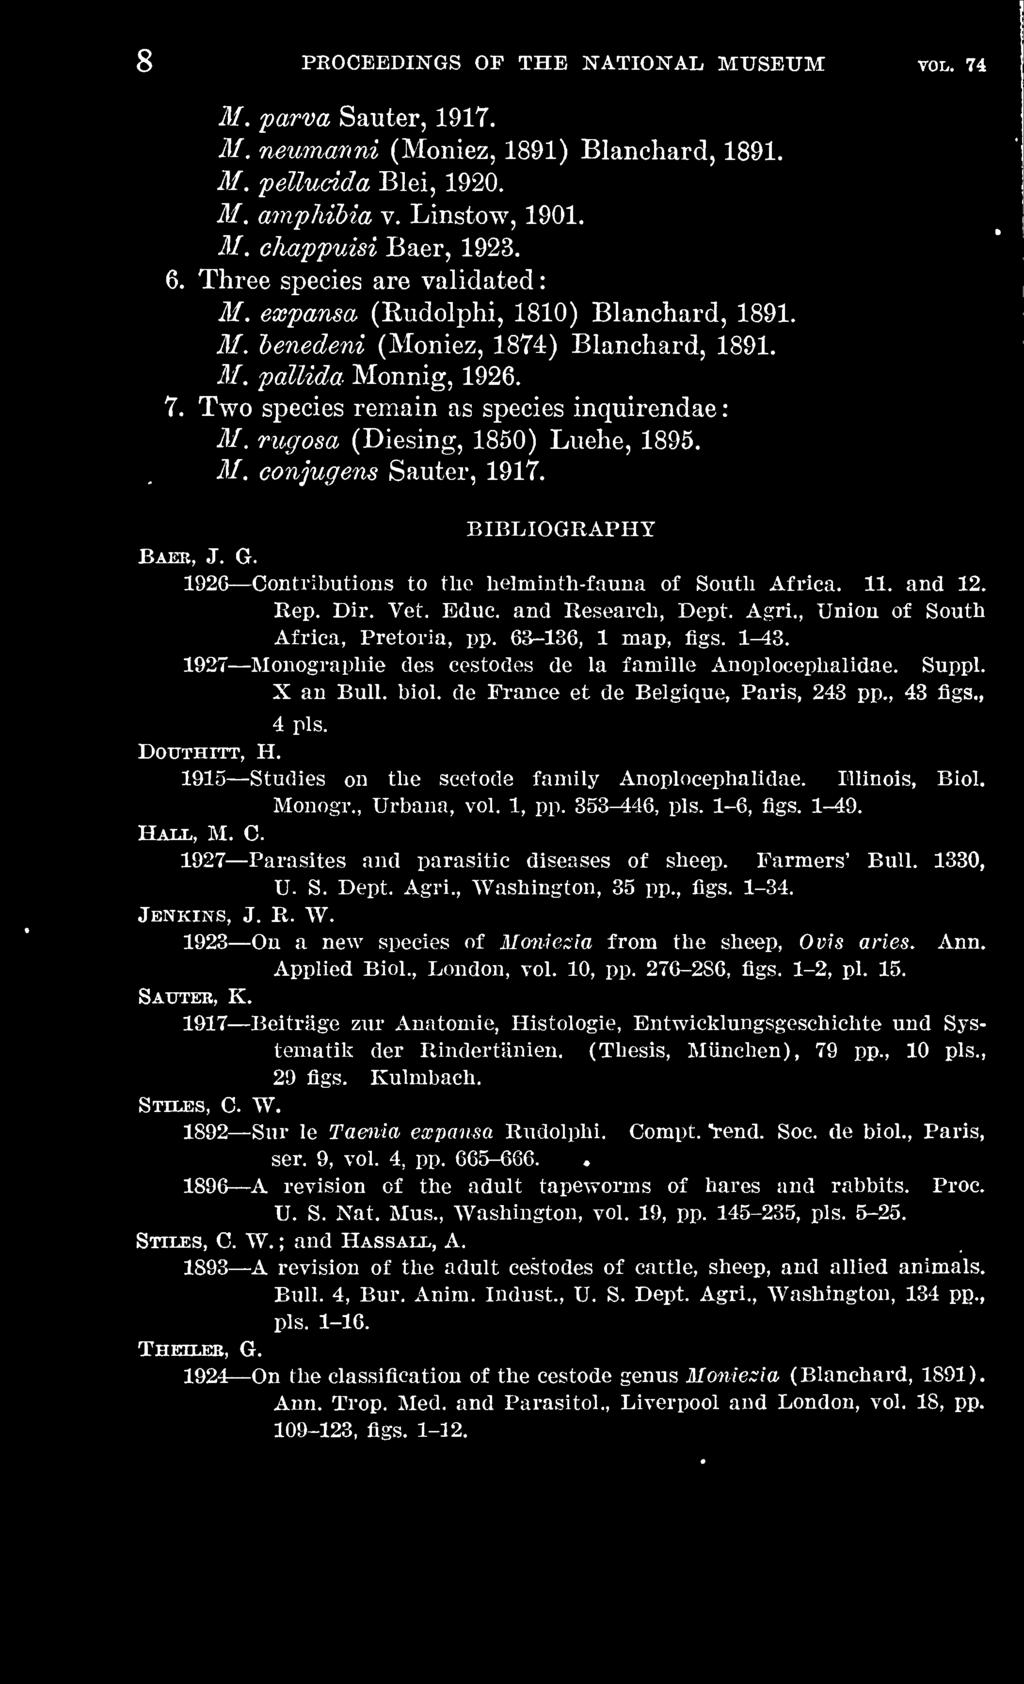 rugosa (Diesing, 1850) Luehe, 1895. M. conjugens Sauter, 1917. BIBLIOGRAPHY Baeb, J. G. 1926 Contributions to tlio helminth-fauna of Soutli Africa. 11. and 12. Rep. Dir. Vet. Educ. and Research, Dept.